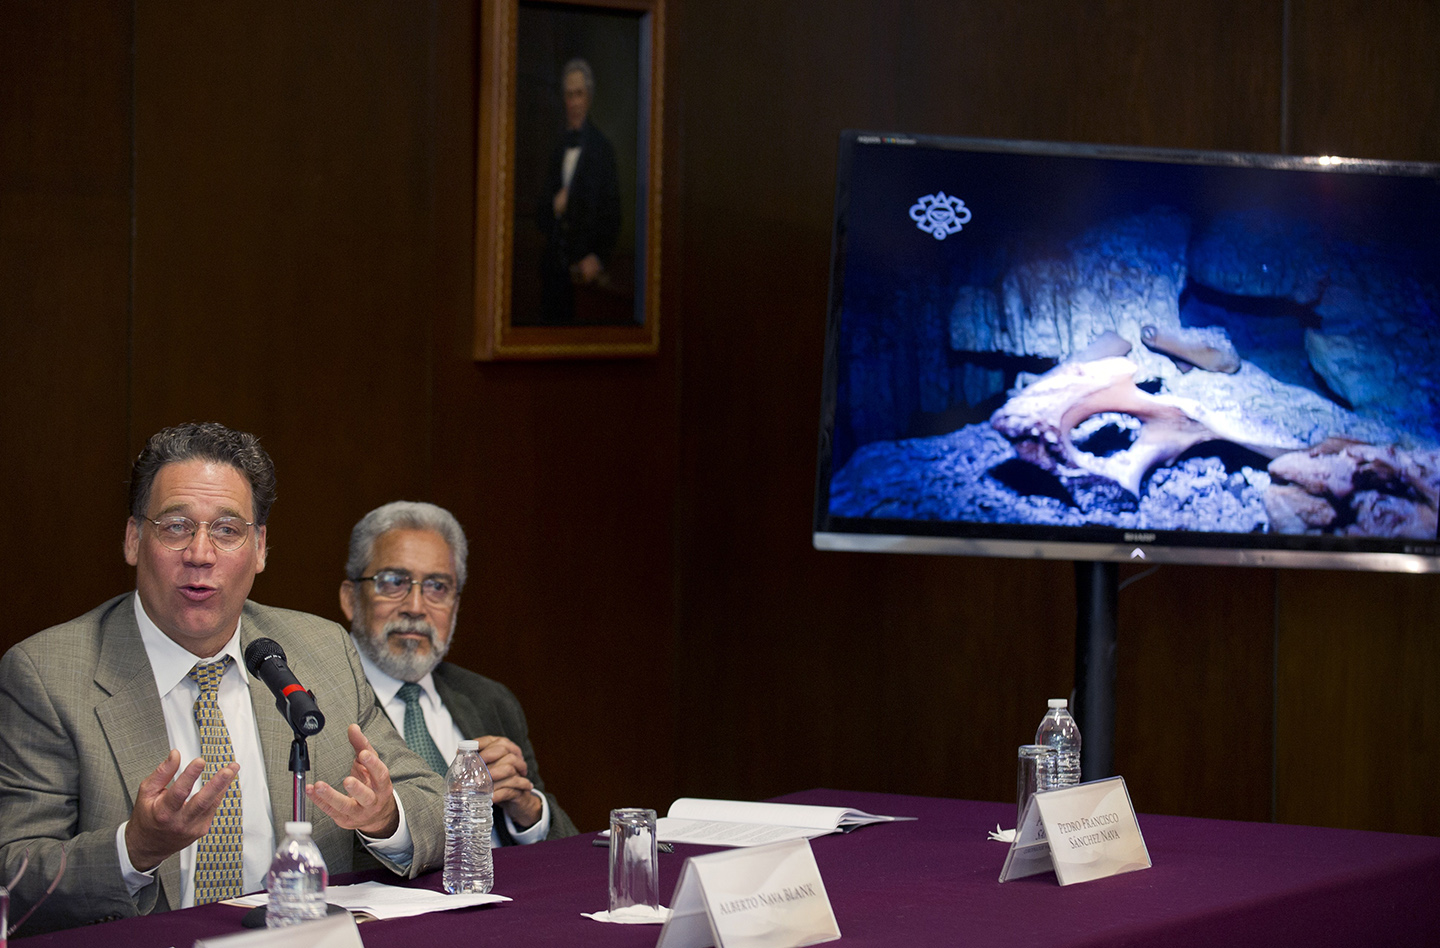 Scientific diver Alberto Nava Blank (L) and Pedro Francisco Sanchez (R) of the Tulum Speleological Project, offer a press conference at the Anthropology National Museum in Mexico City, on May 15, 2014. A teenage girl who fell into a hole more than 12,000 years ago in Mexico's Yucatan Peninsula is offering new clues about the origins of the first Native Americans, researchers said Thursday. Named "Naia" by scientists, her skeleton is among the oldest known and best preserved in the Americas. New bones discovered in a different cave nearby also date back to 13,000 years ago. (ALFREDO ESTRELLA/AFP/Getty Images)